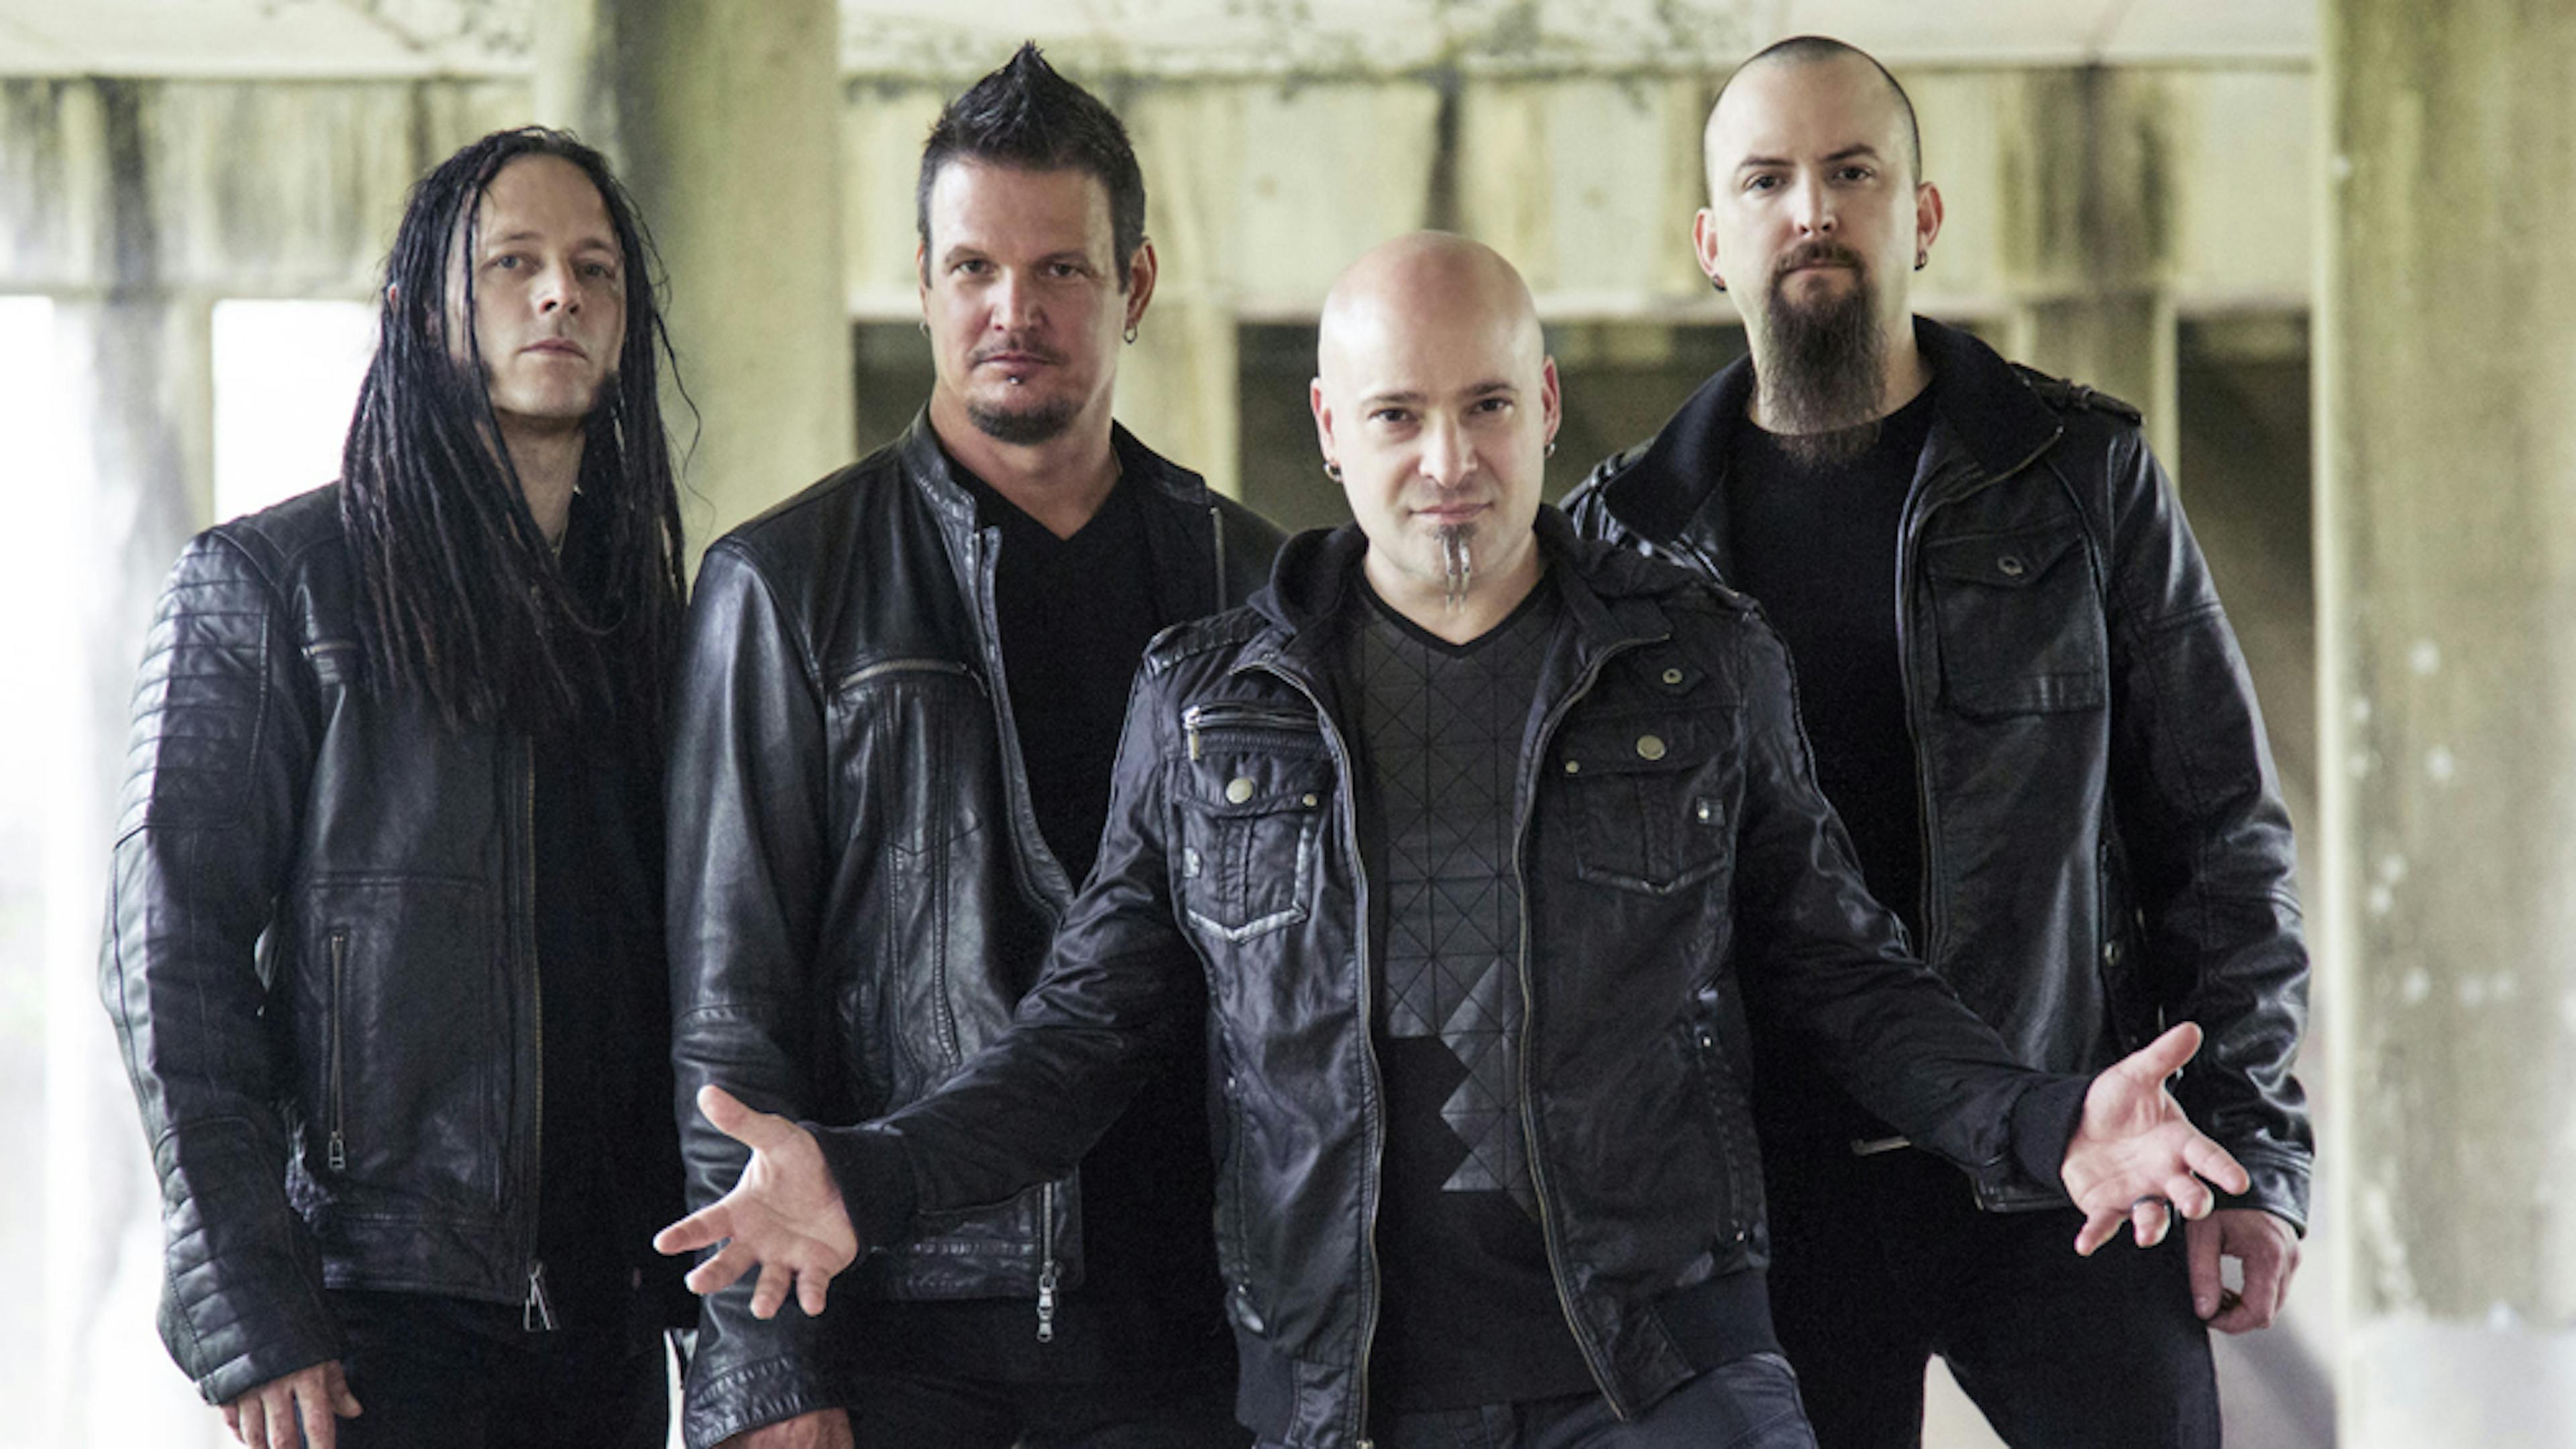 This Is The Setlist From Disturbed's First UK Headline Show In Nine Years